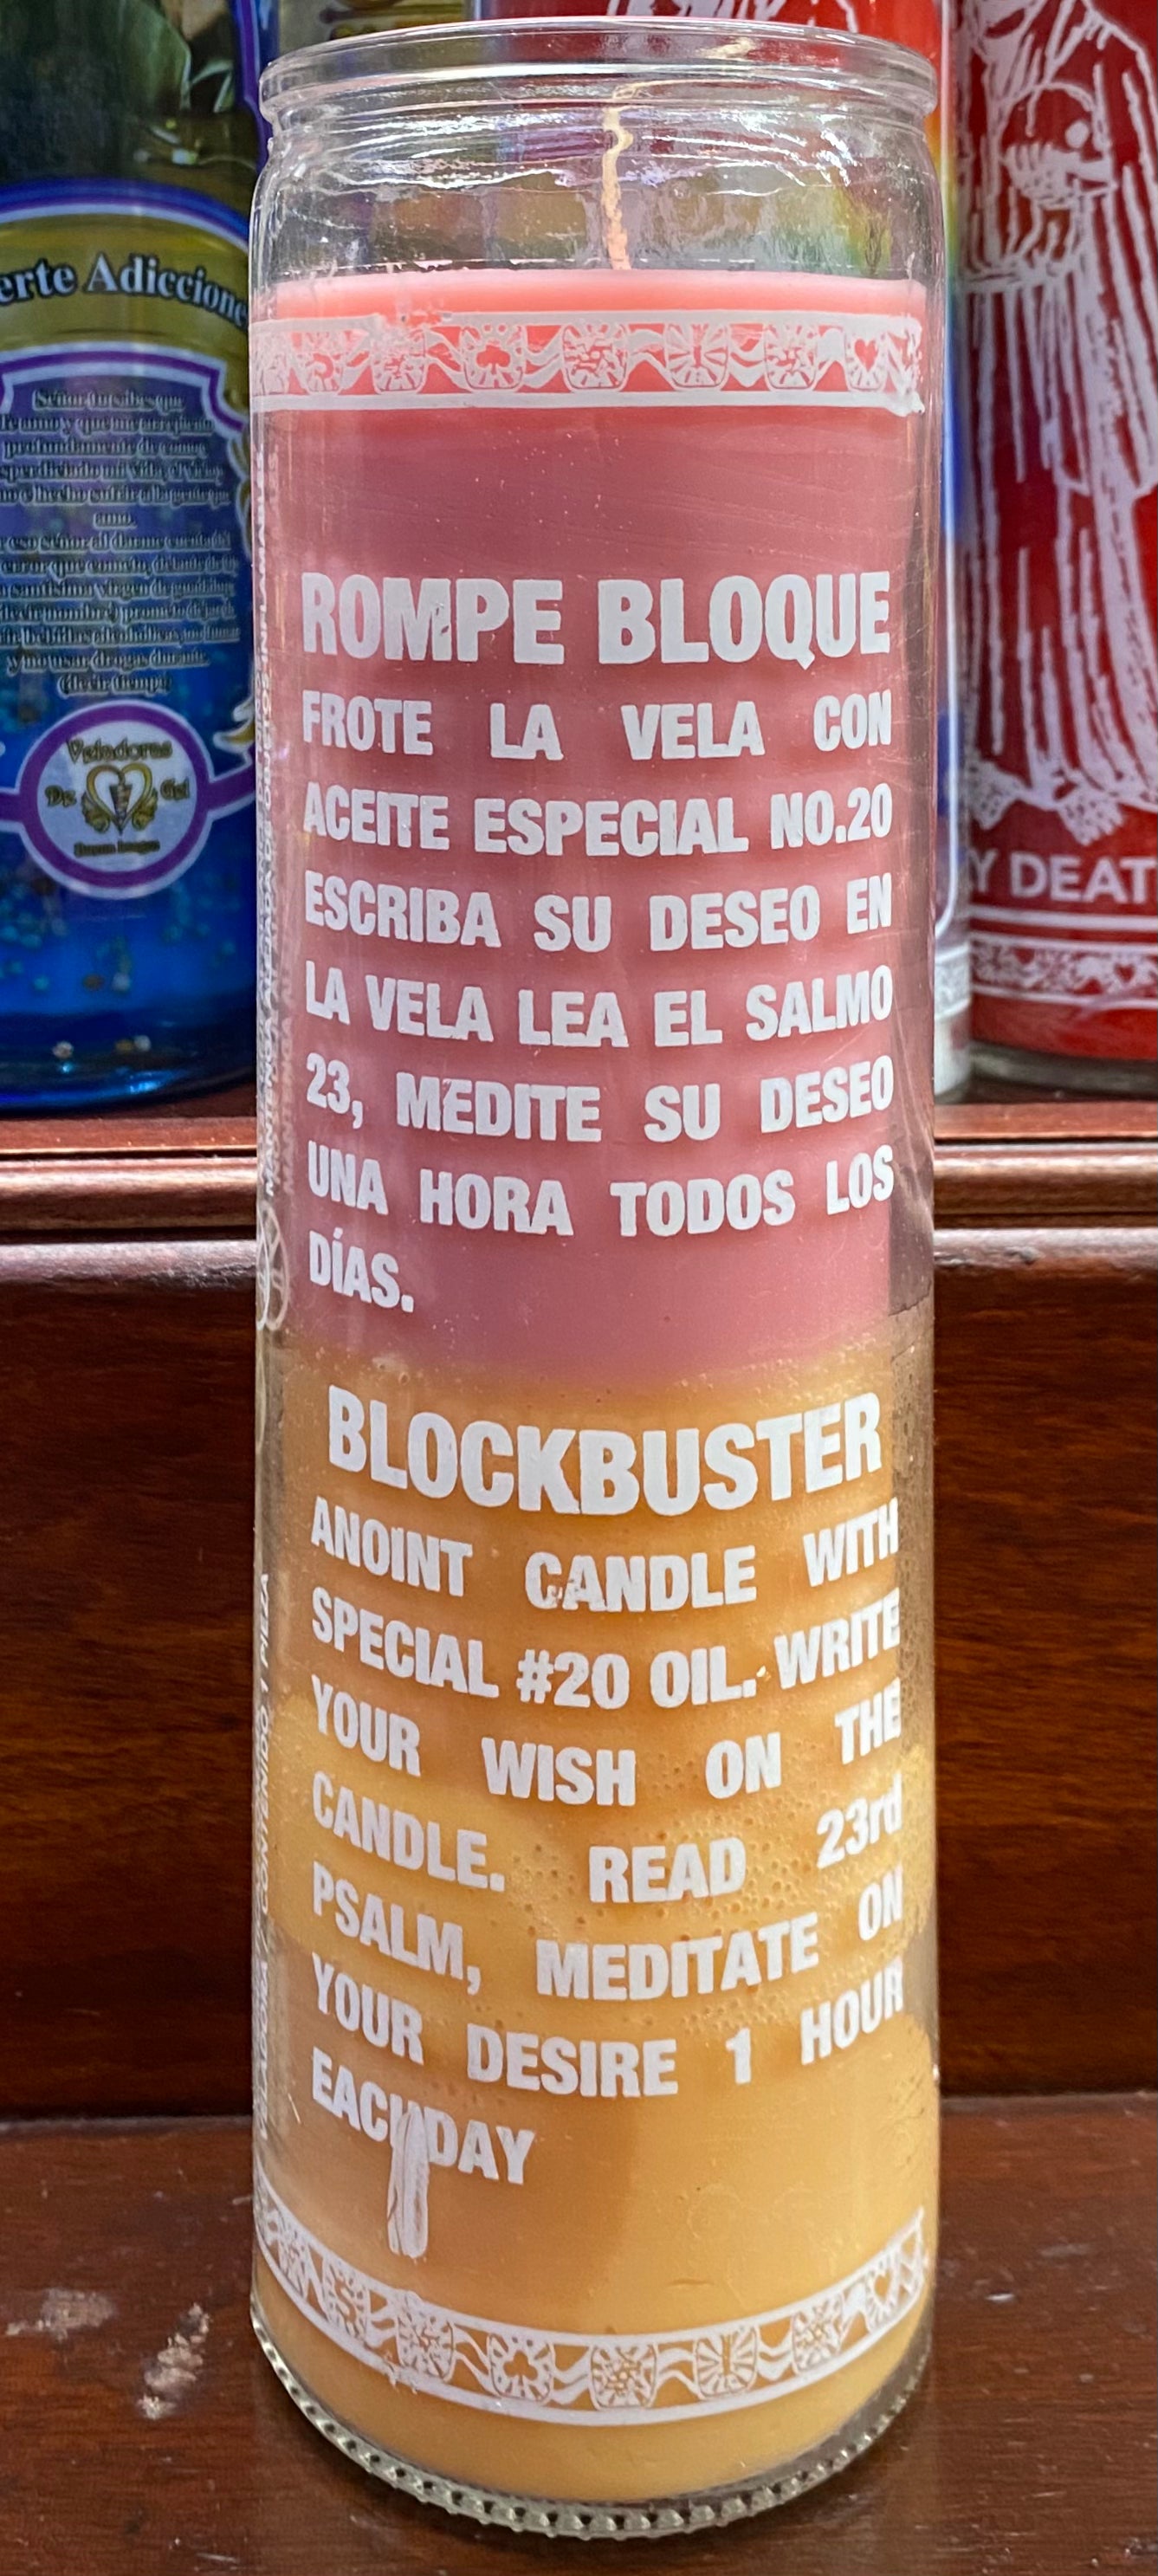 Rompe Bloque/ Block Buster Candle